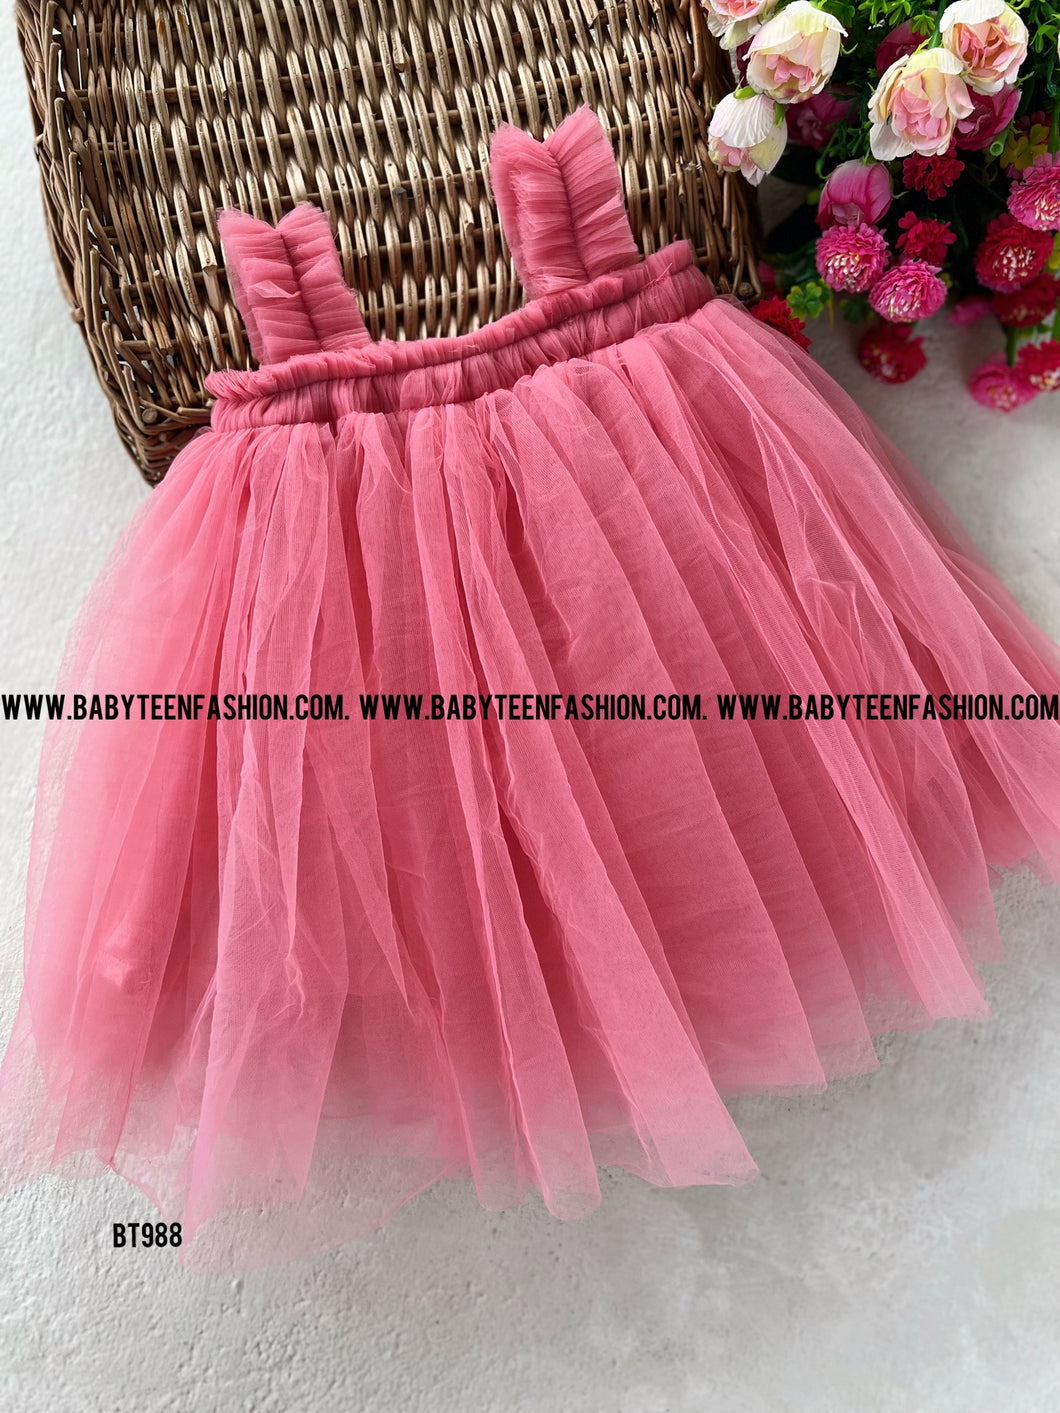 BT988 Coral Blossom Baby Gala Gown – A Fairy Tale Awaits